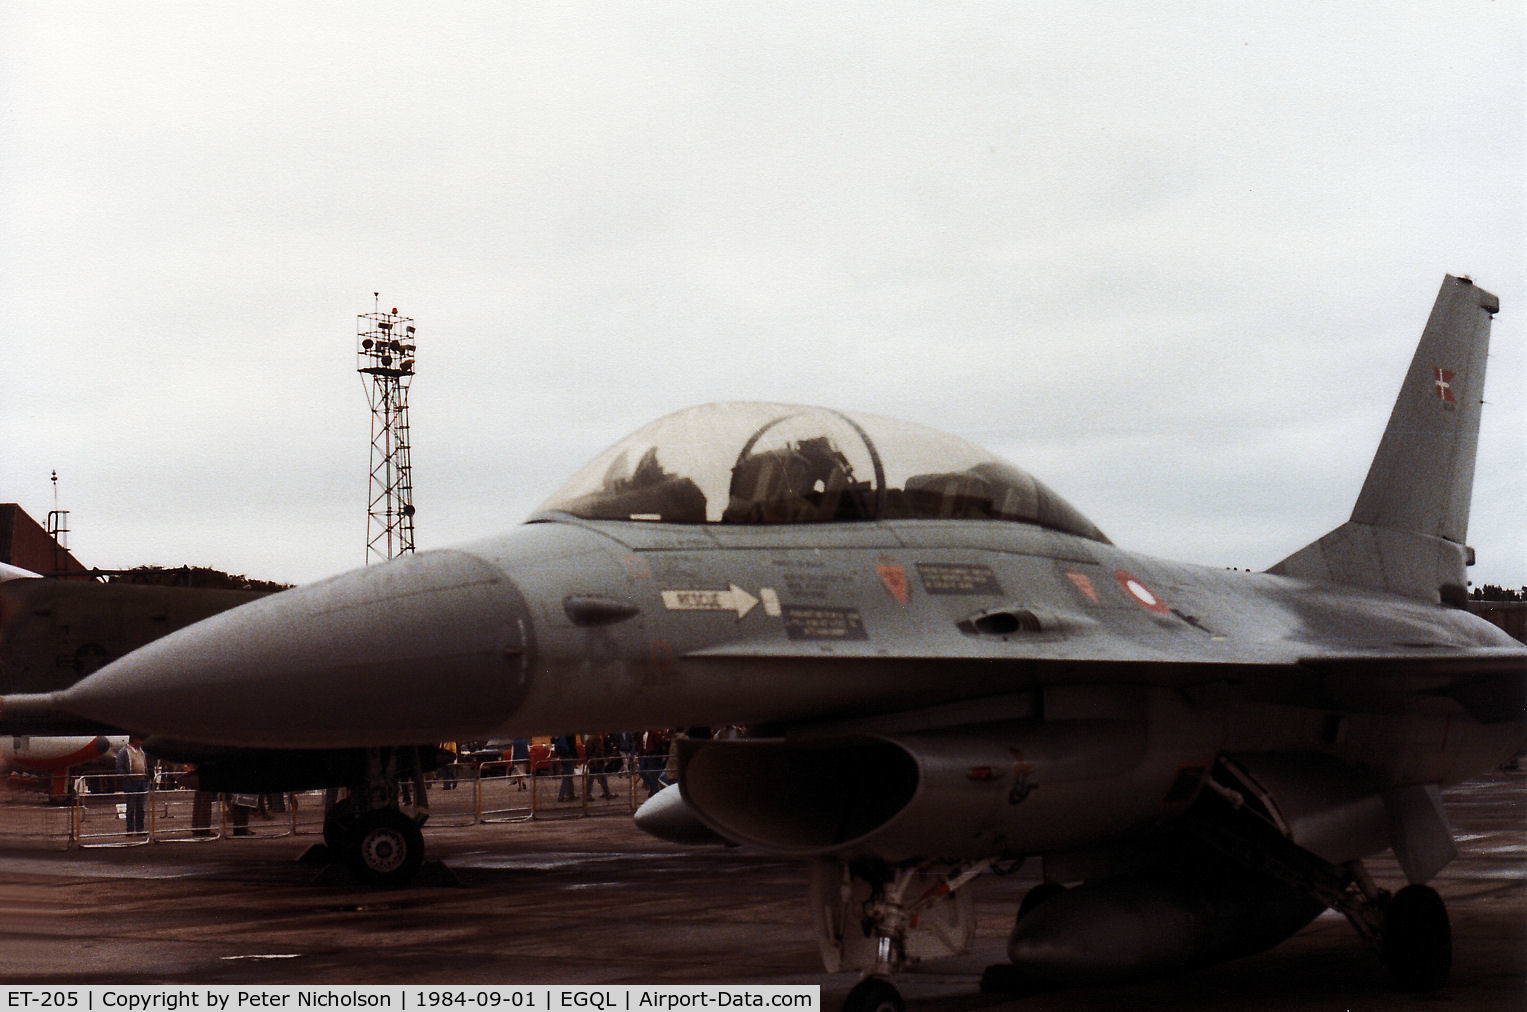 ET-205, 1980 SABCA F-16B Fighting Falcon C/N 6G-2, Another view of the Royal Danish Air Force F-16B of Esk 730 on display at the 1984 RAF Leuchars Airshow.